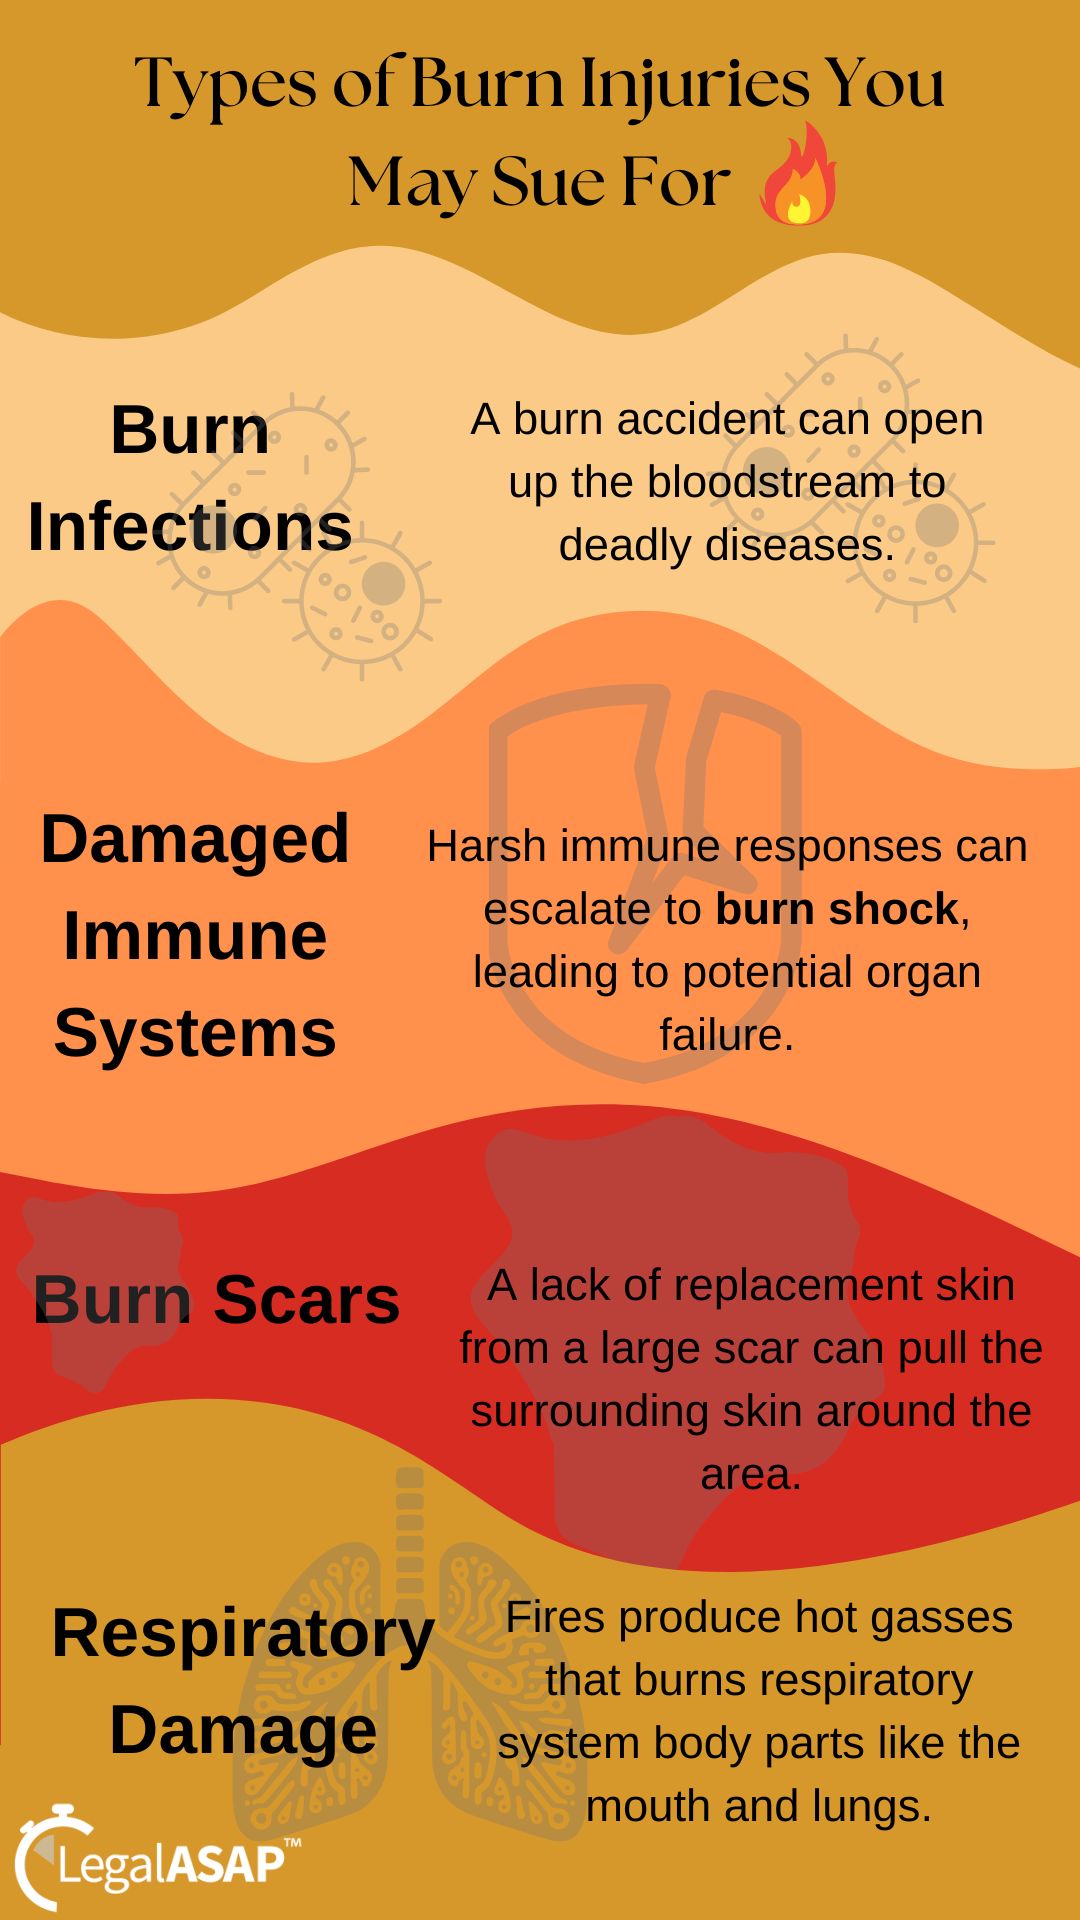 The types of burn injuries you may sue for.